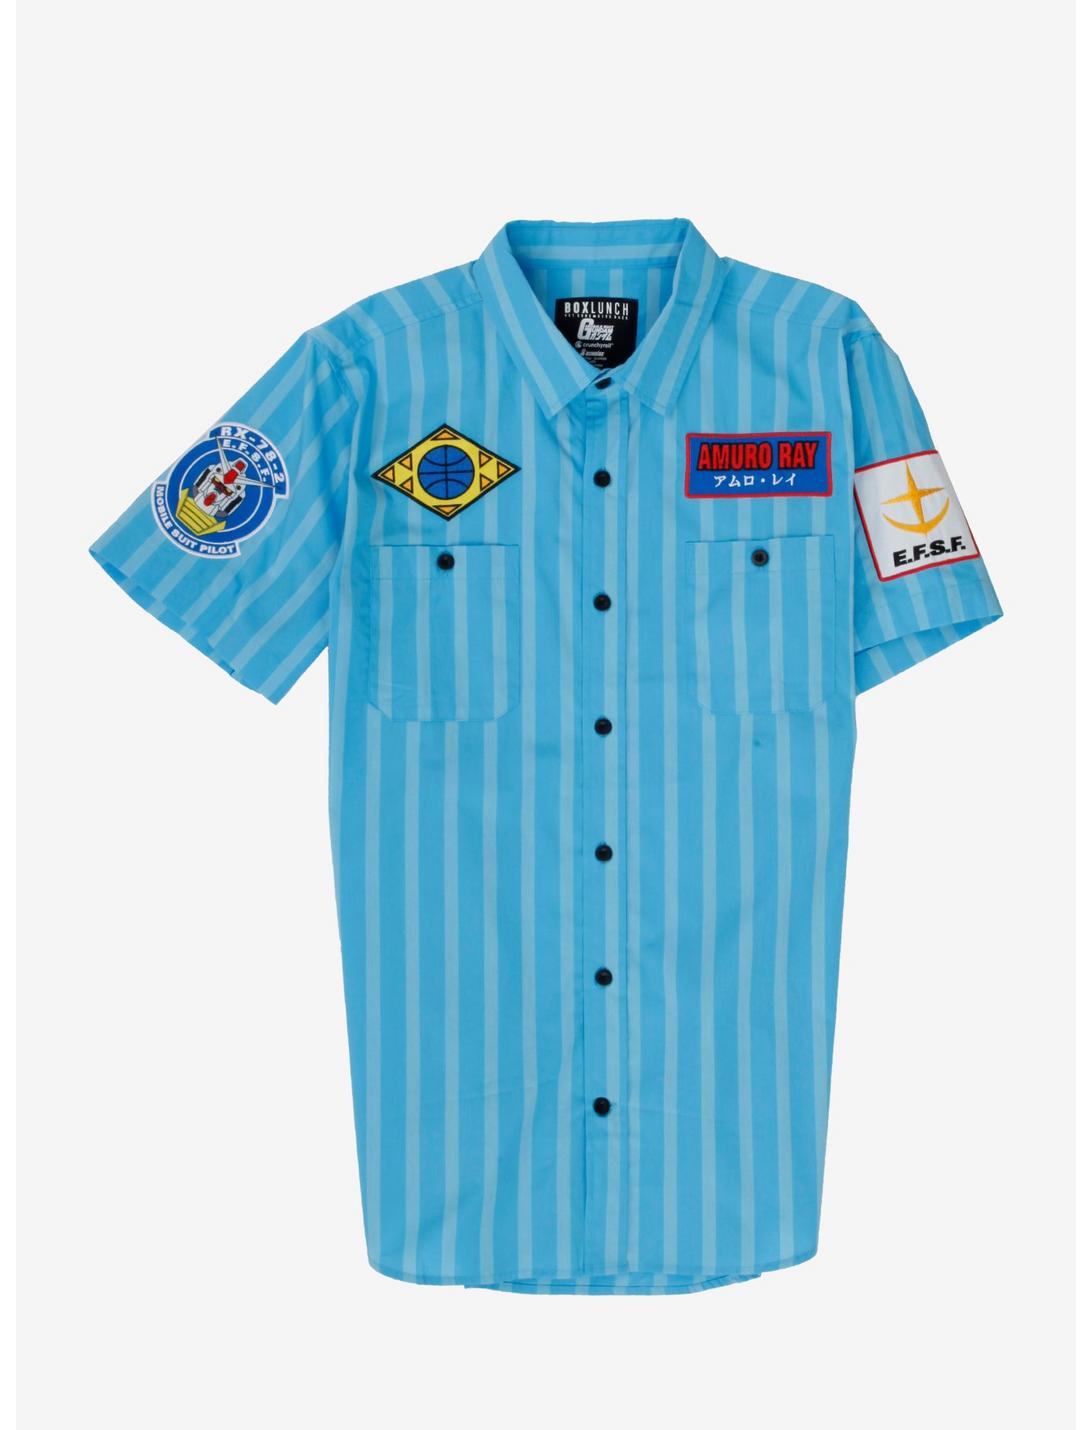 Mobile Suit Gundam E.F.S.F. Patches Striped Woven Button-Up - BoxLunch Exclusive, LIGHT BLUE, hi-res